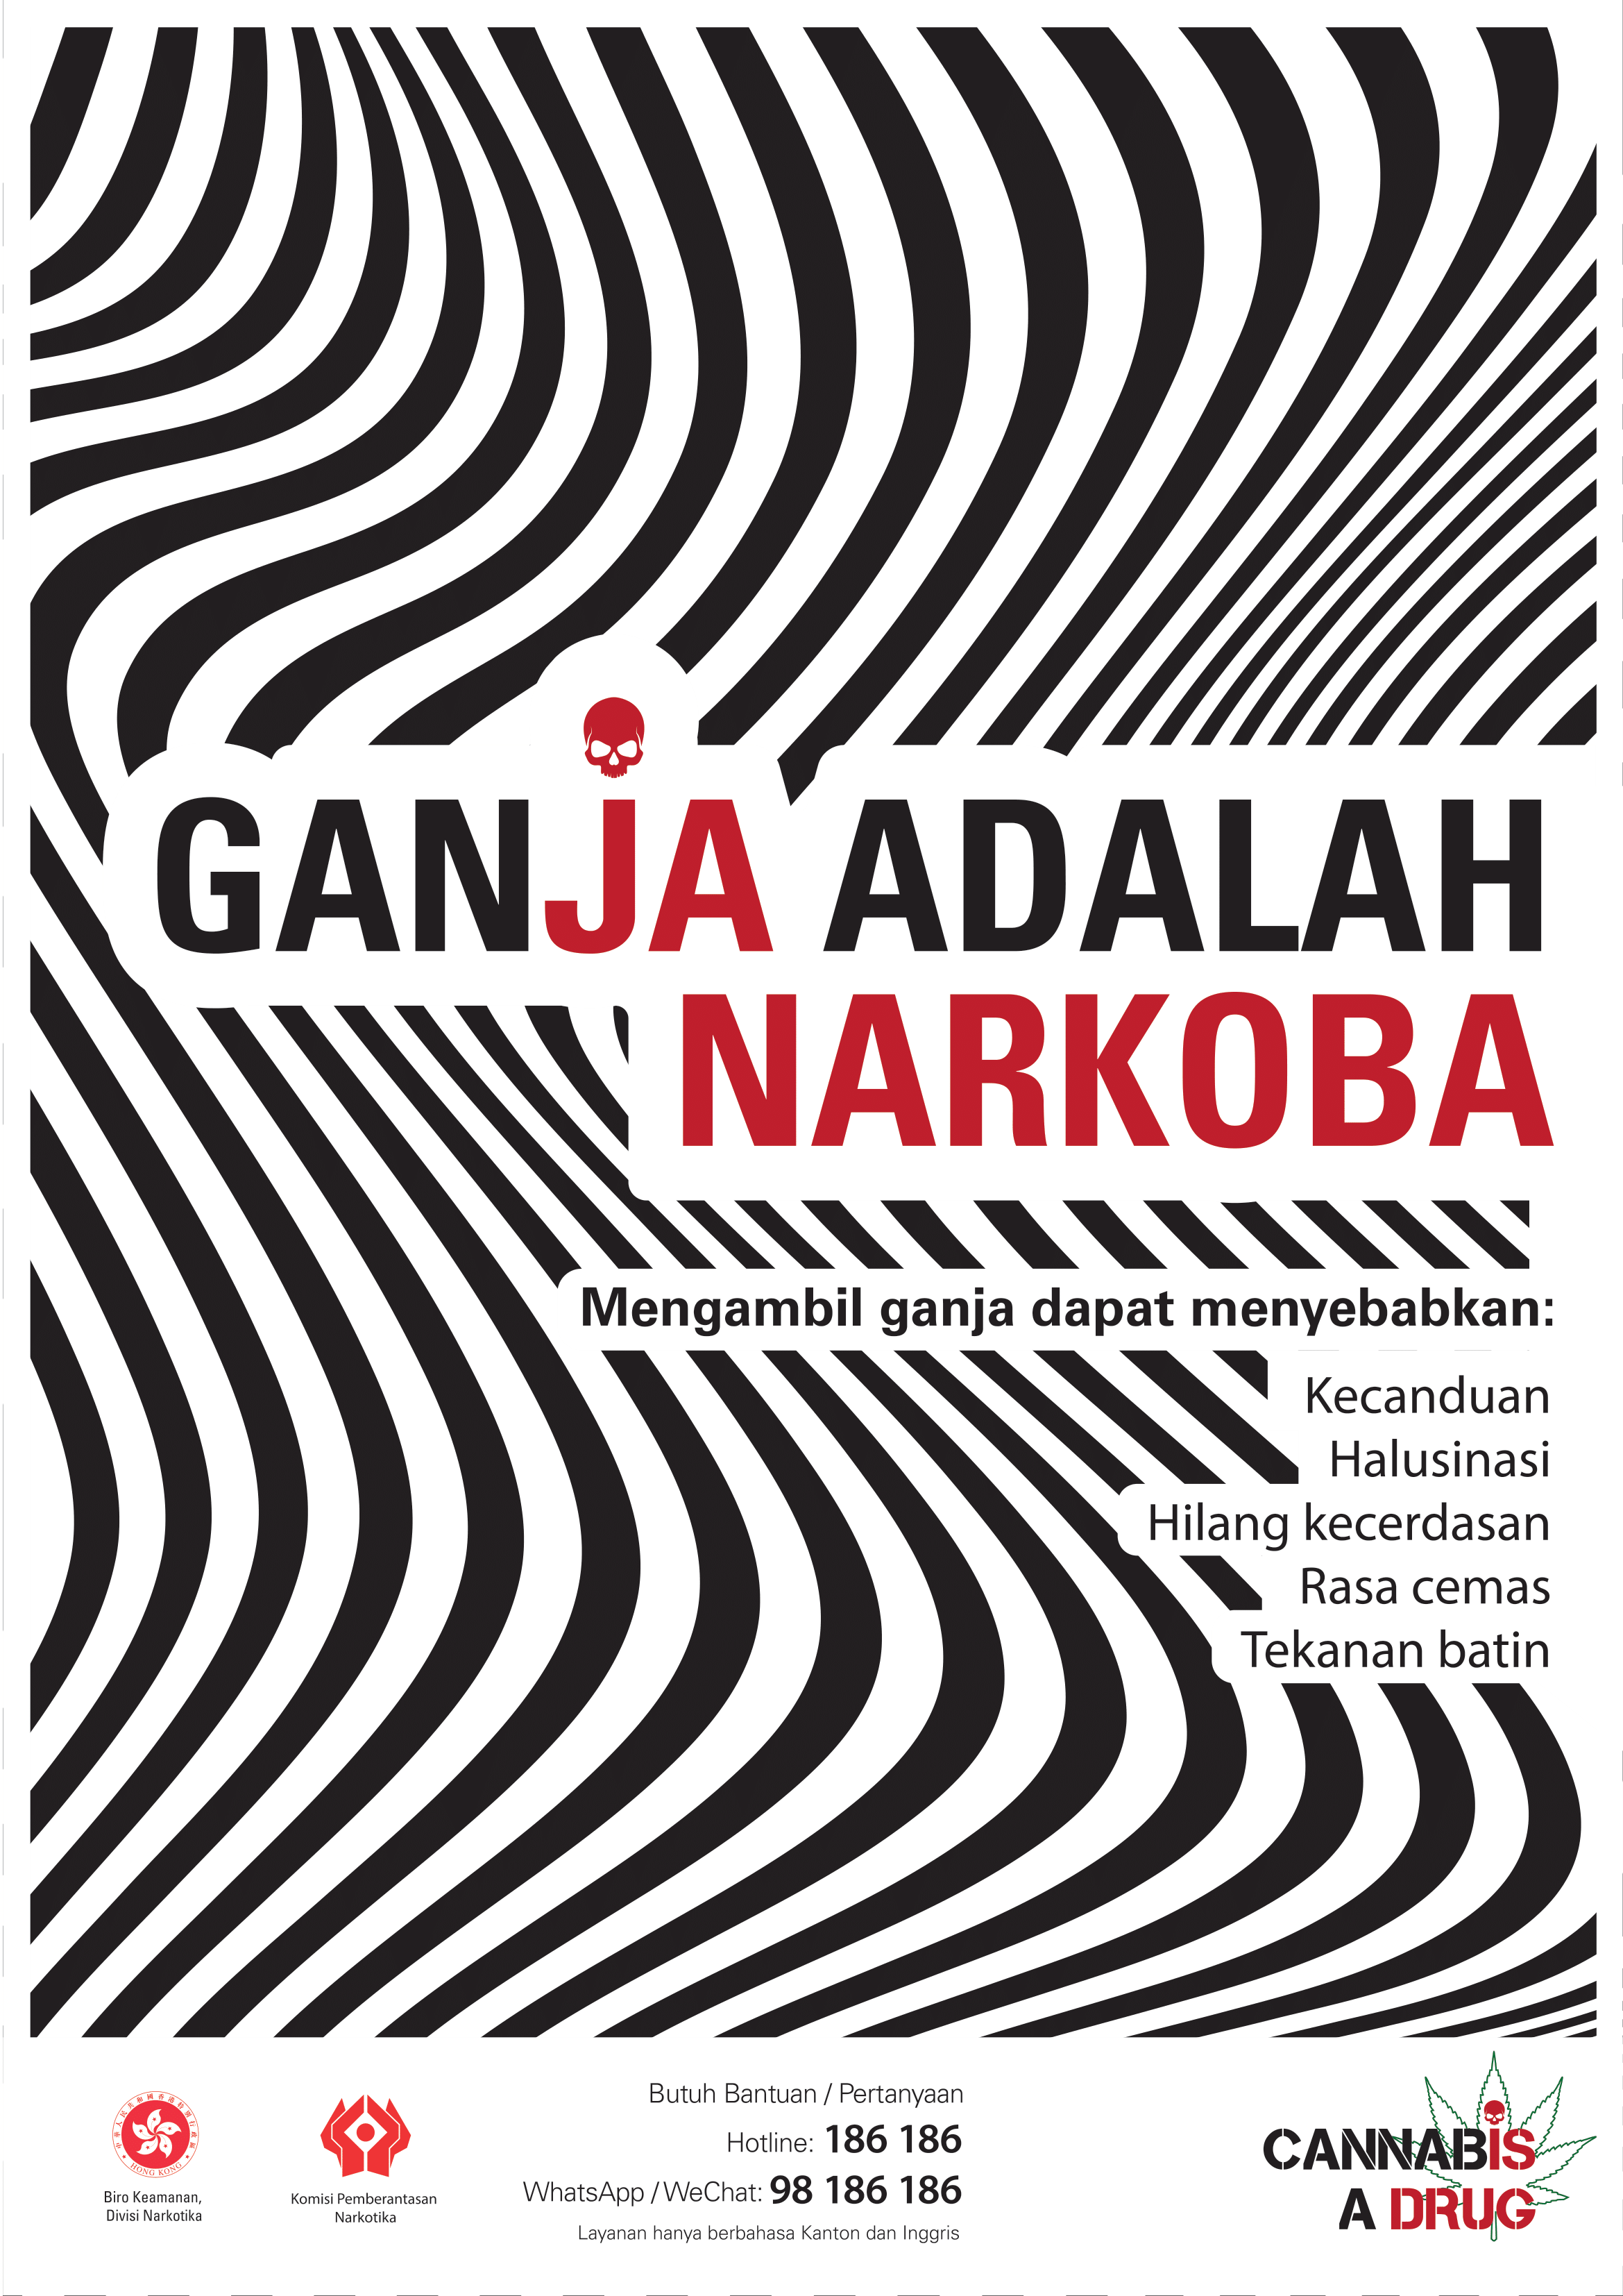 Anti-drug poster "Cannabis is a drug" - Bahasa Indonesia version